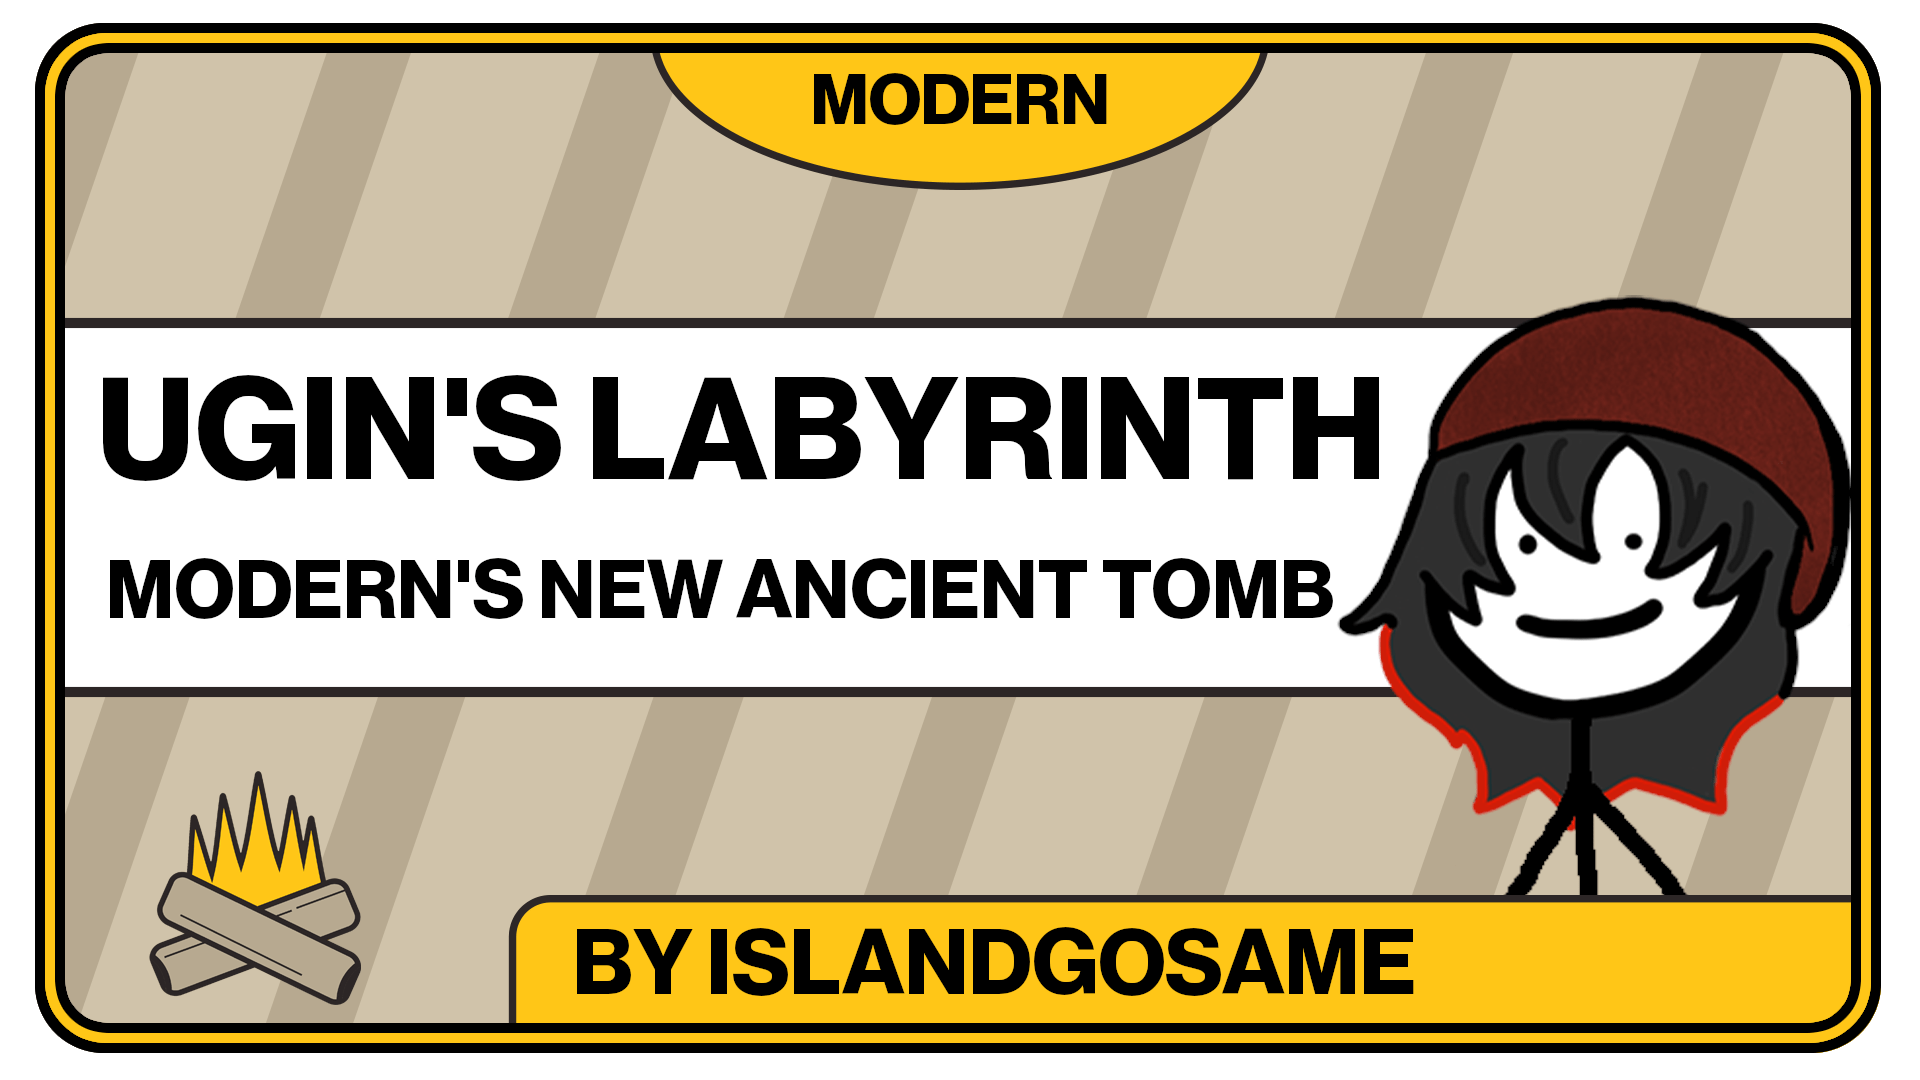 Ugin's Labyrinth - The New Ancient Tomb